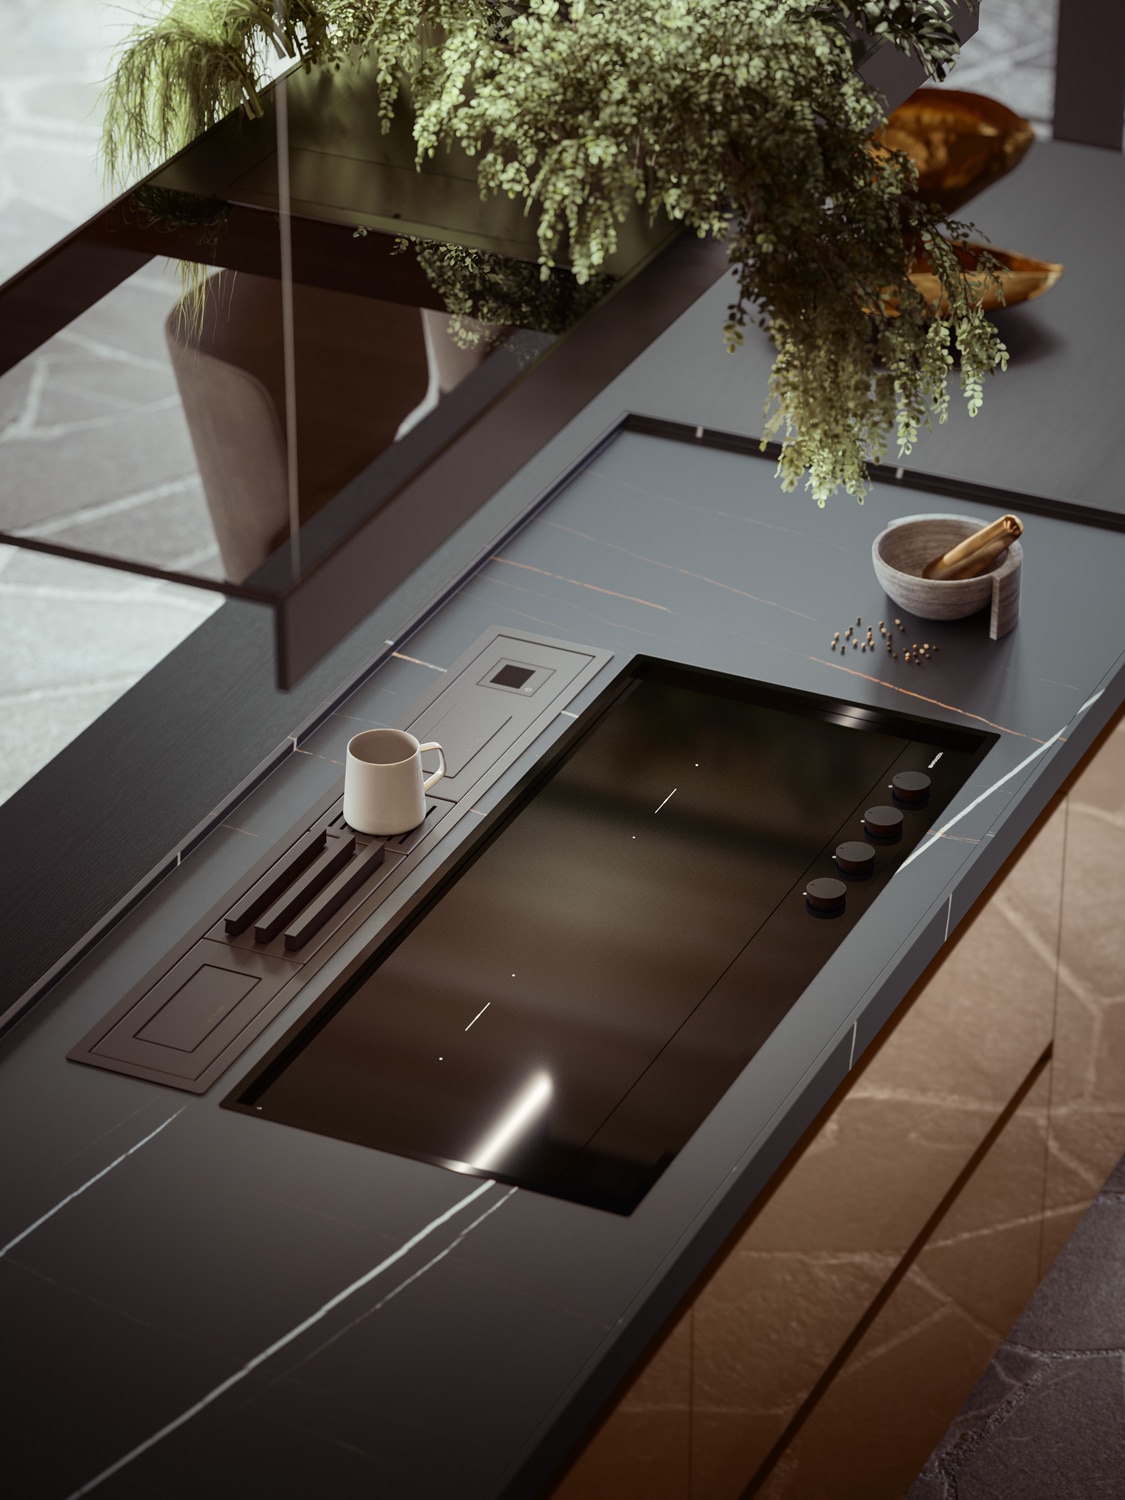 On the island, integrated within the countertop, it is possible to have a customized channel equipped for various functions (measuring scale, holders for dishes, glassware, knives, spices and more).